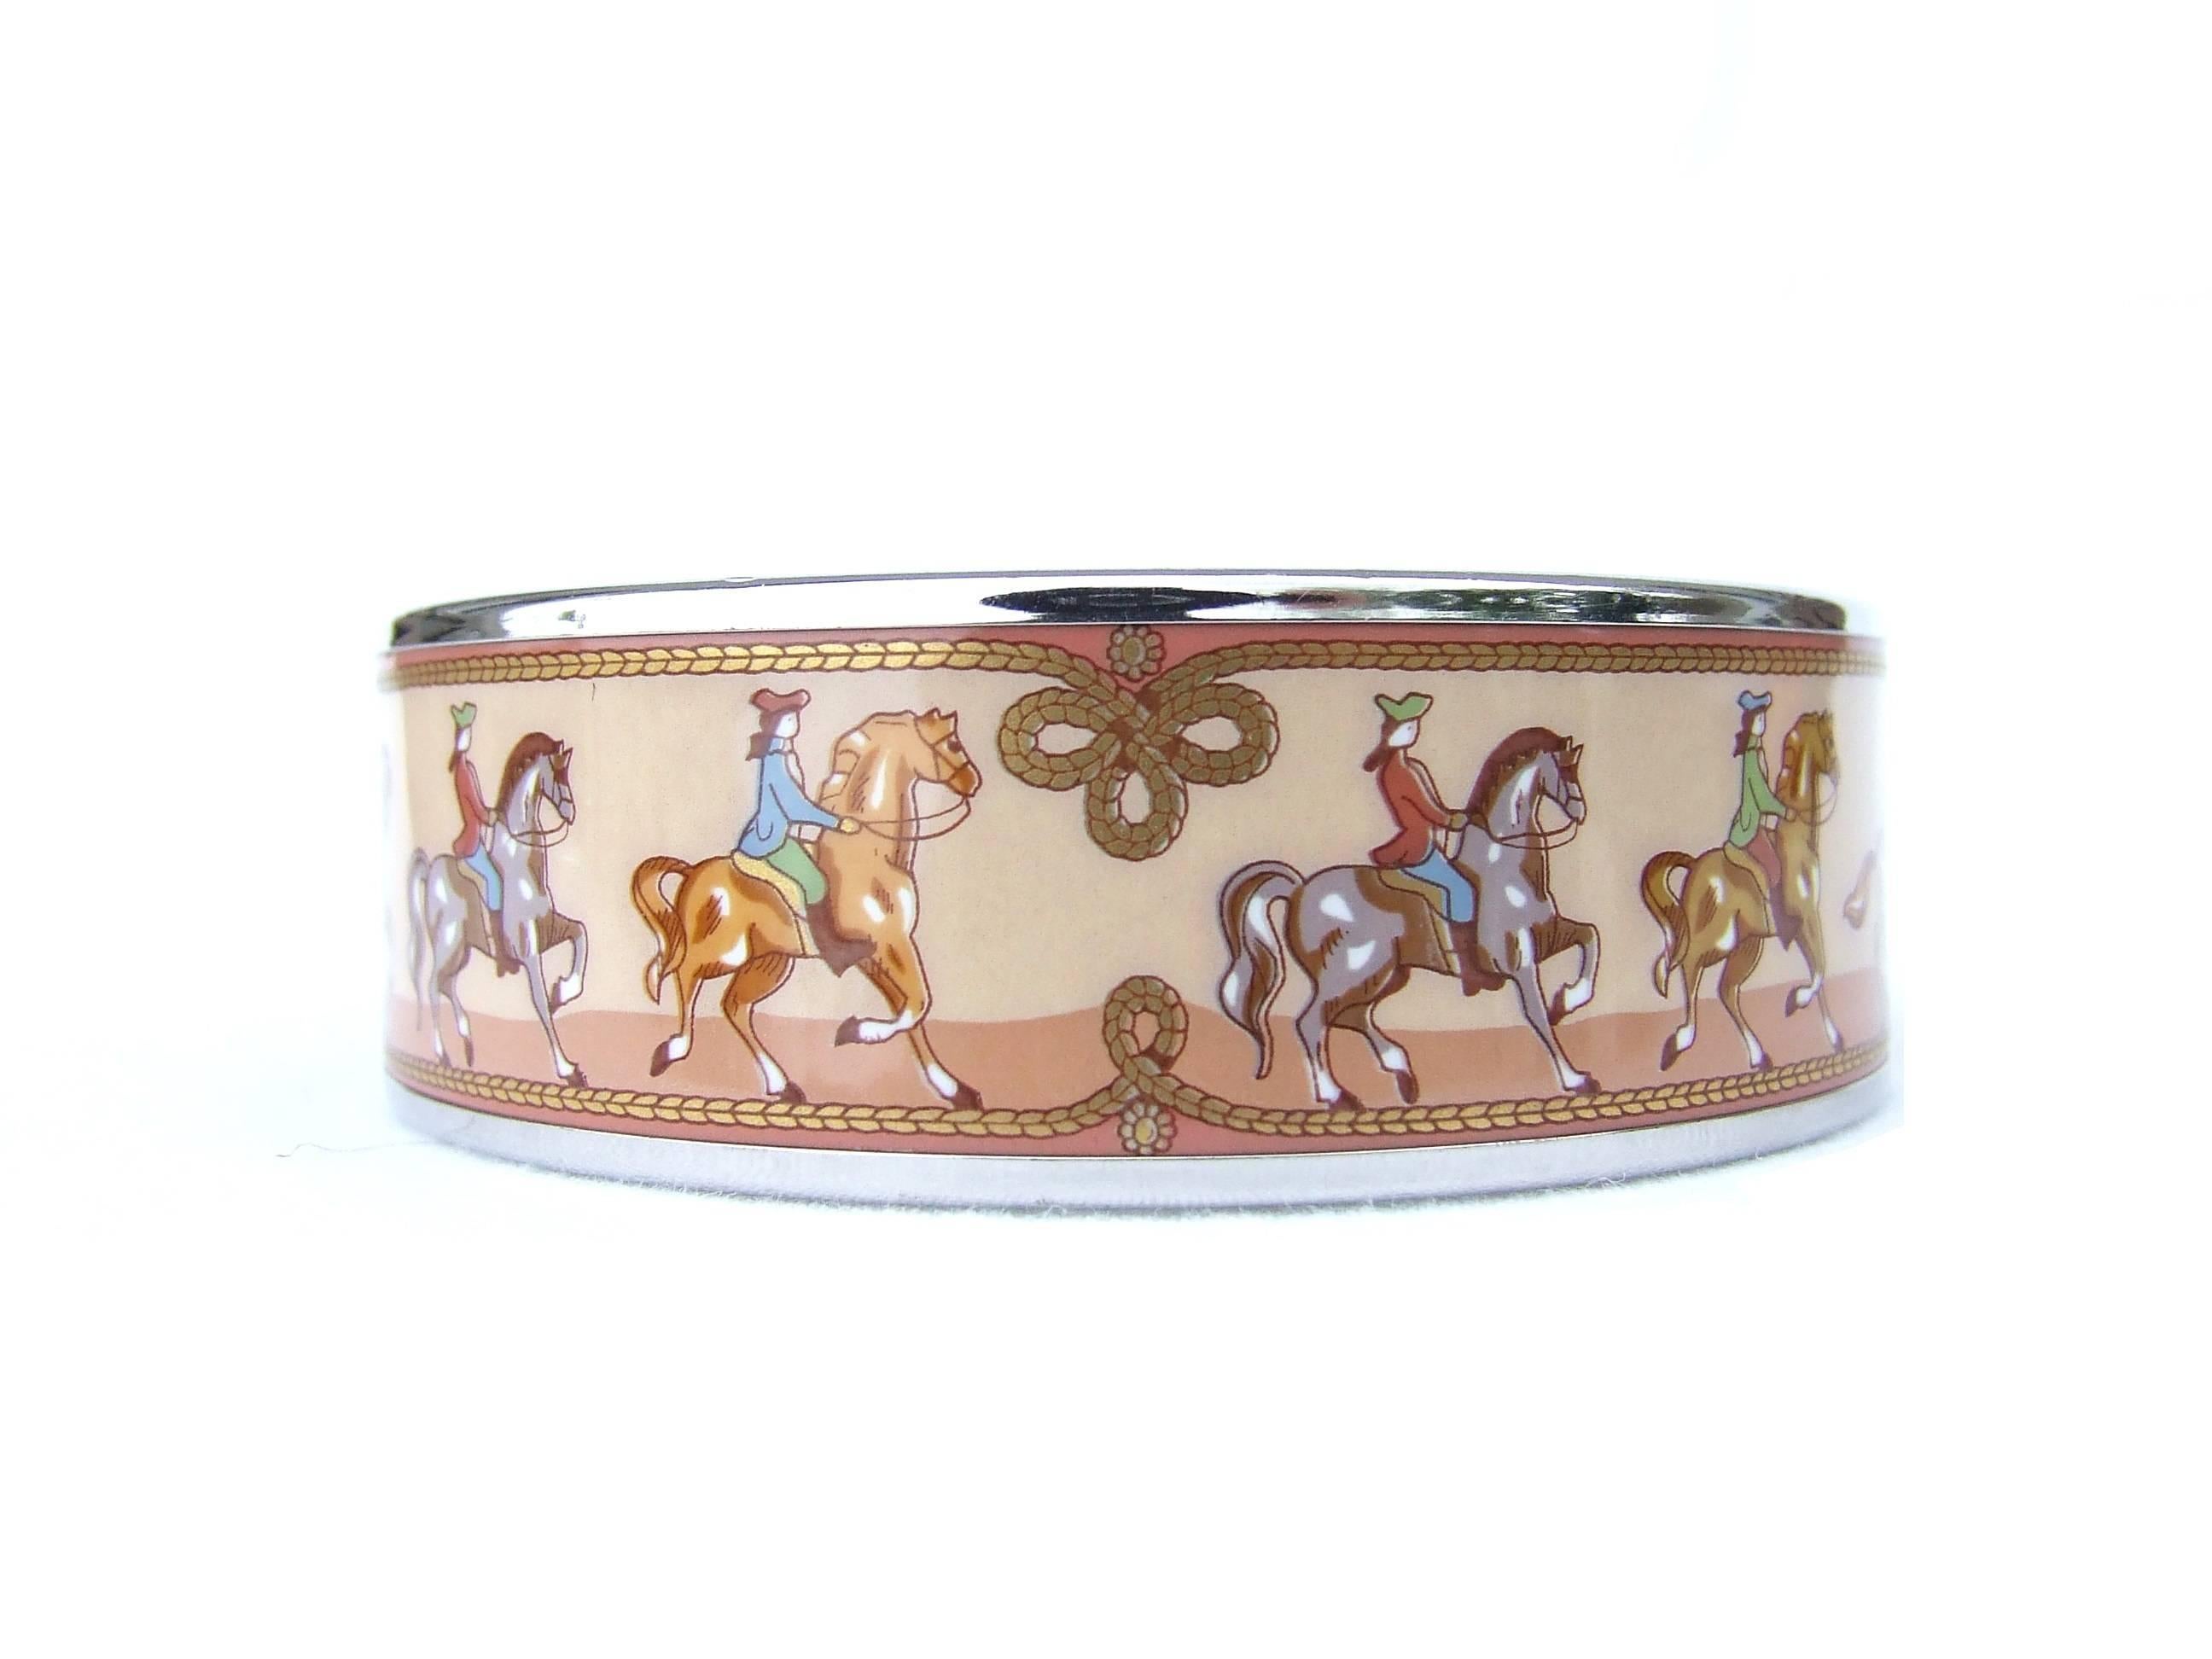 Beautiful Authentic Hermes Bracelet

Pattern: Horses

I think but can not garantee that it it comes from the pattern 